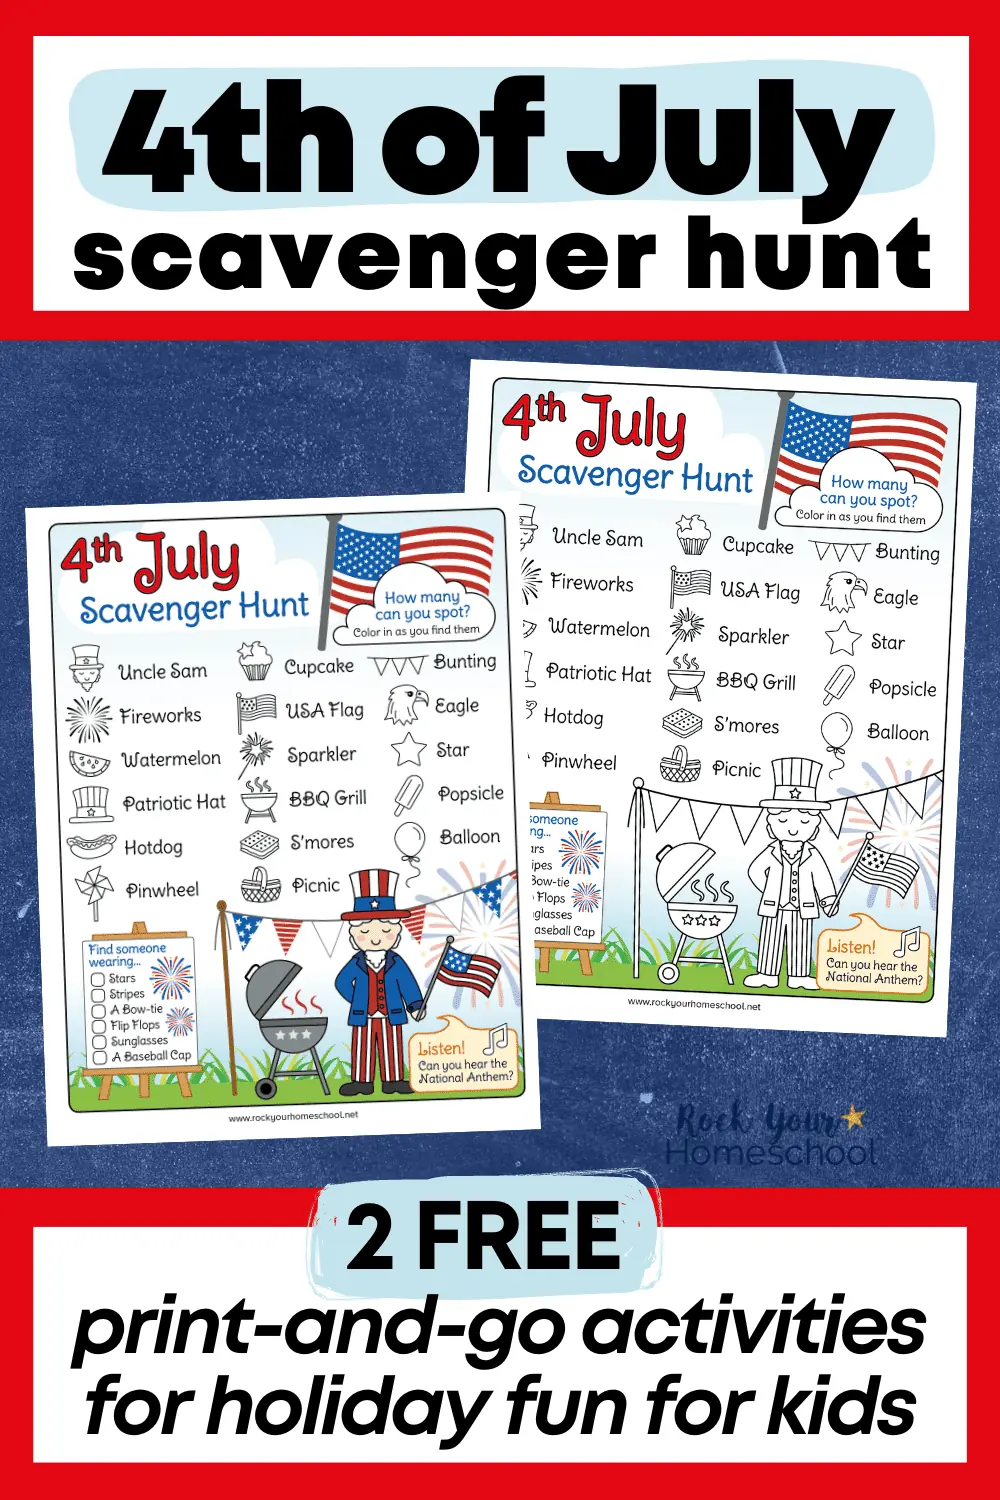 4th of July Scavenger Hunt for a Fun Holiday Activity for Kids (Free)